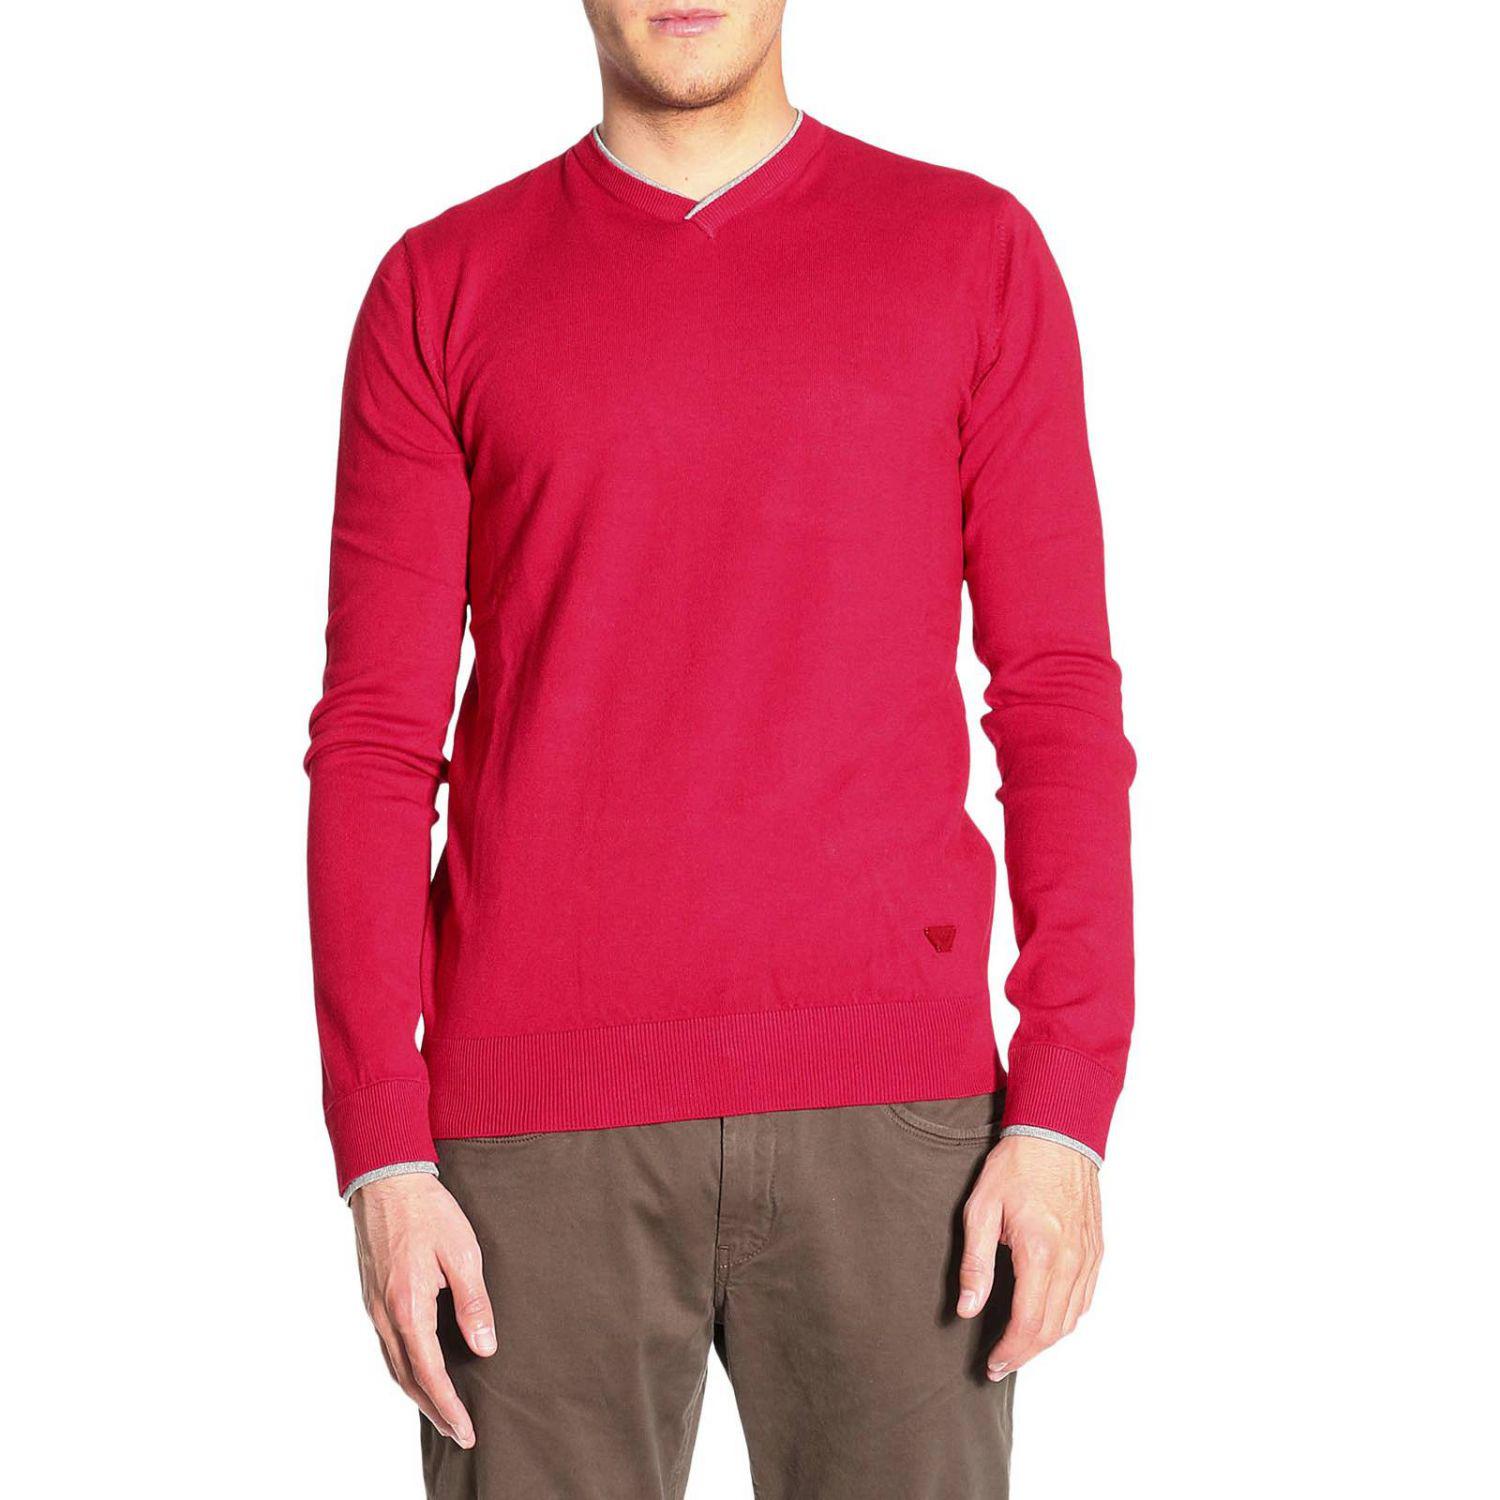 Armani Jeans Synthetic Sweater Men in Red for Men - Lyst